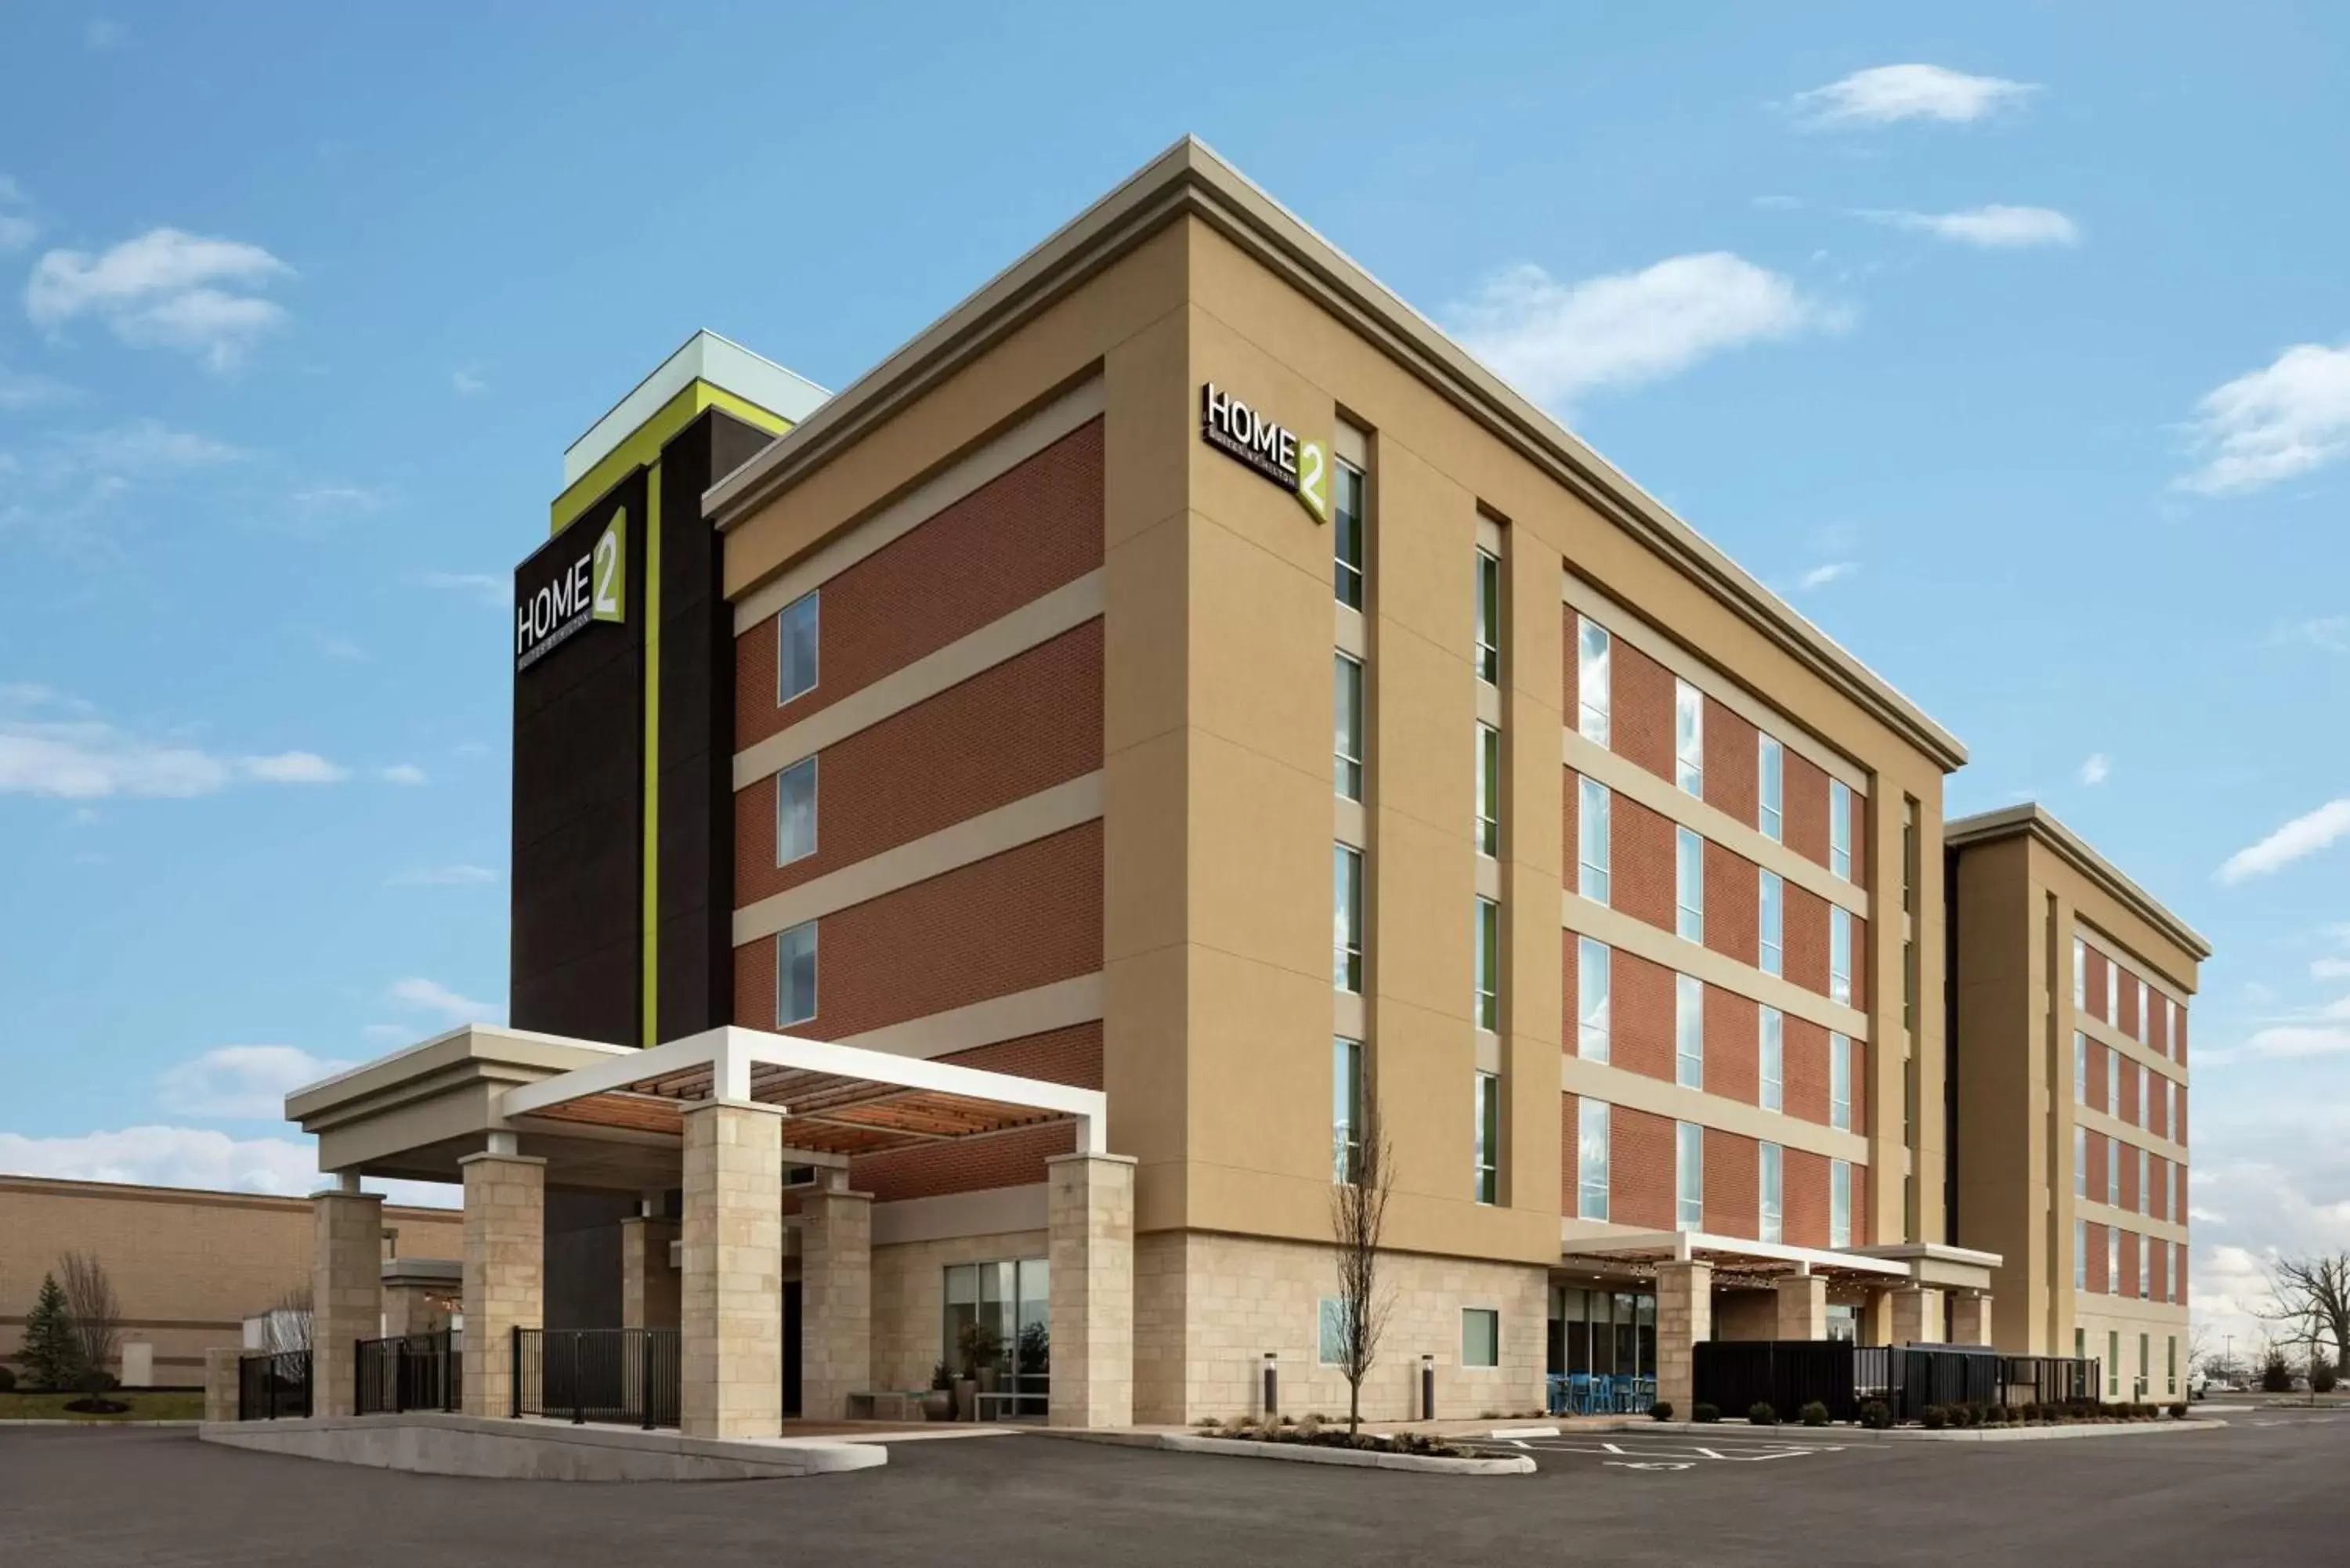 Property Building in Home2 Suites By Hilton Dayton/Beavercreek, Oh